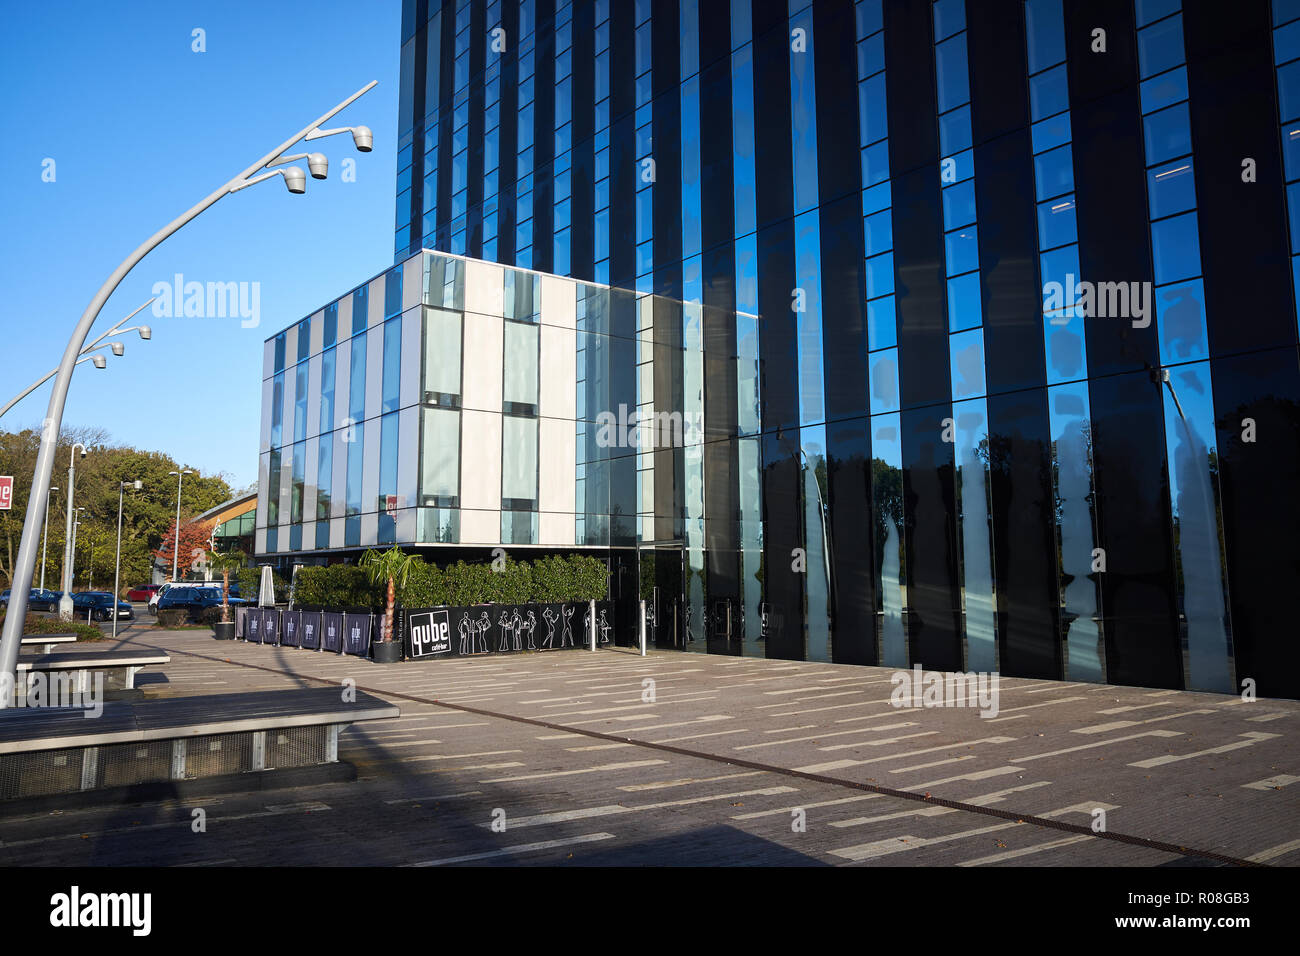 Qube cafe at the Cube building of Corby Council, England. Stock Photo